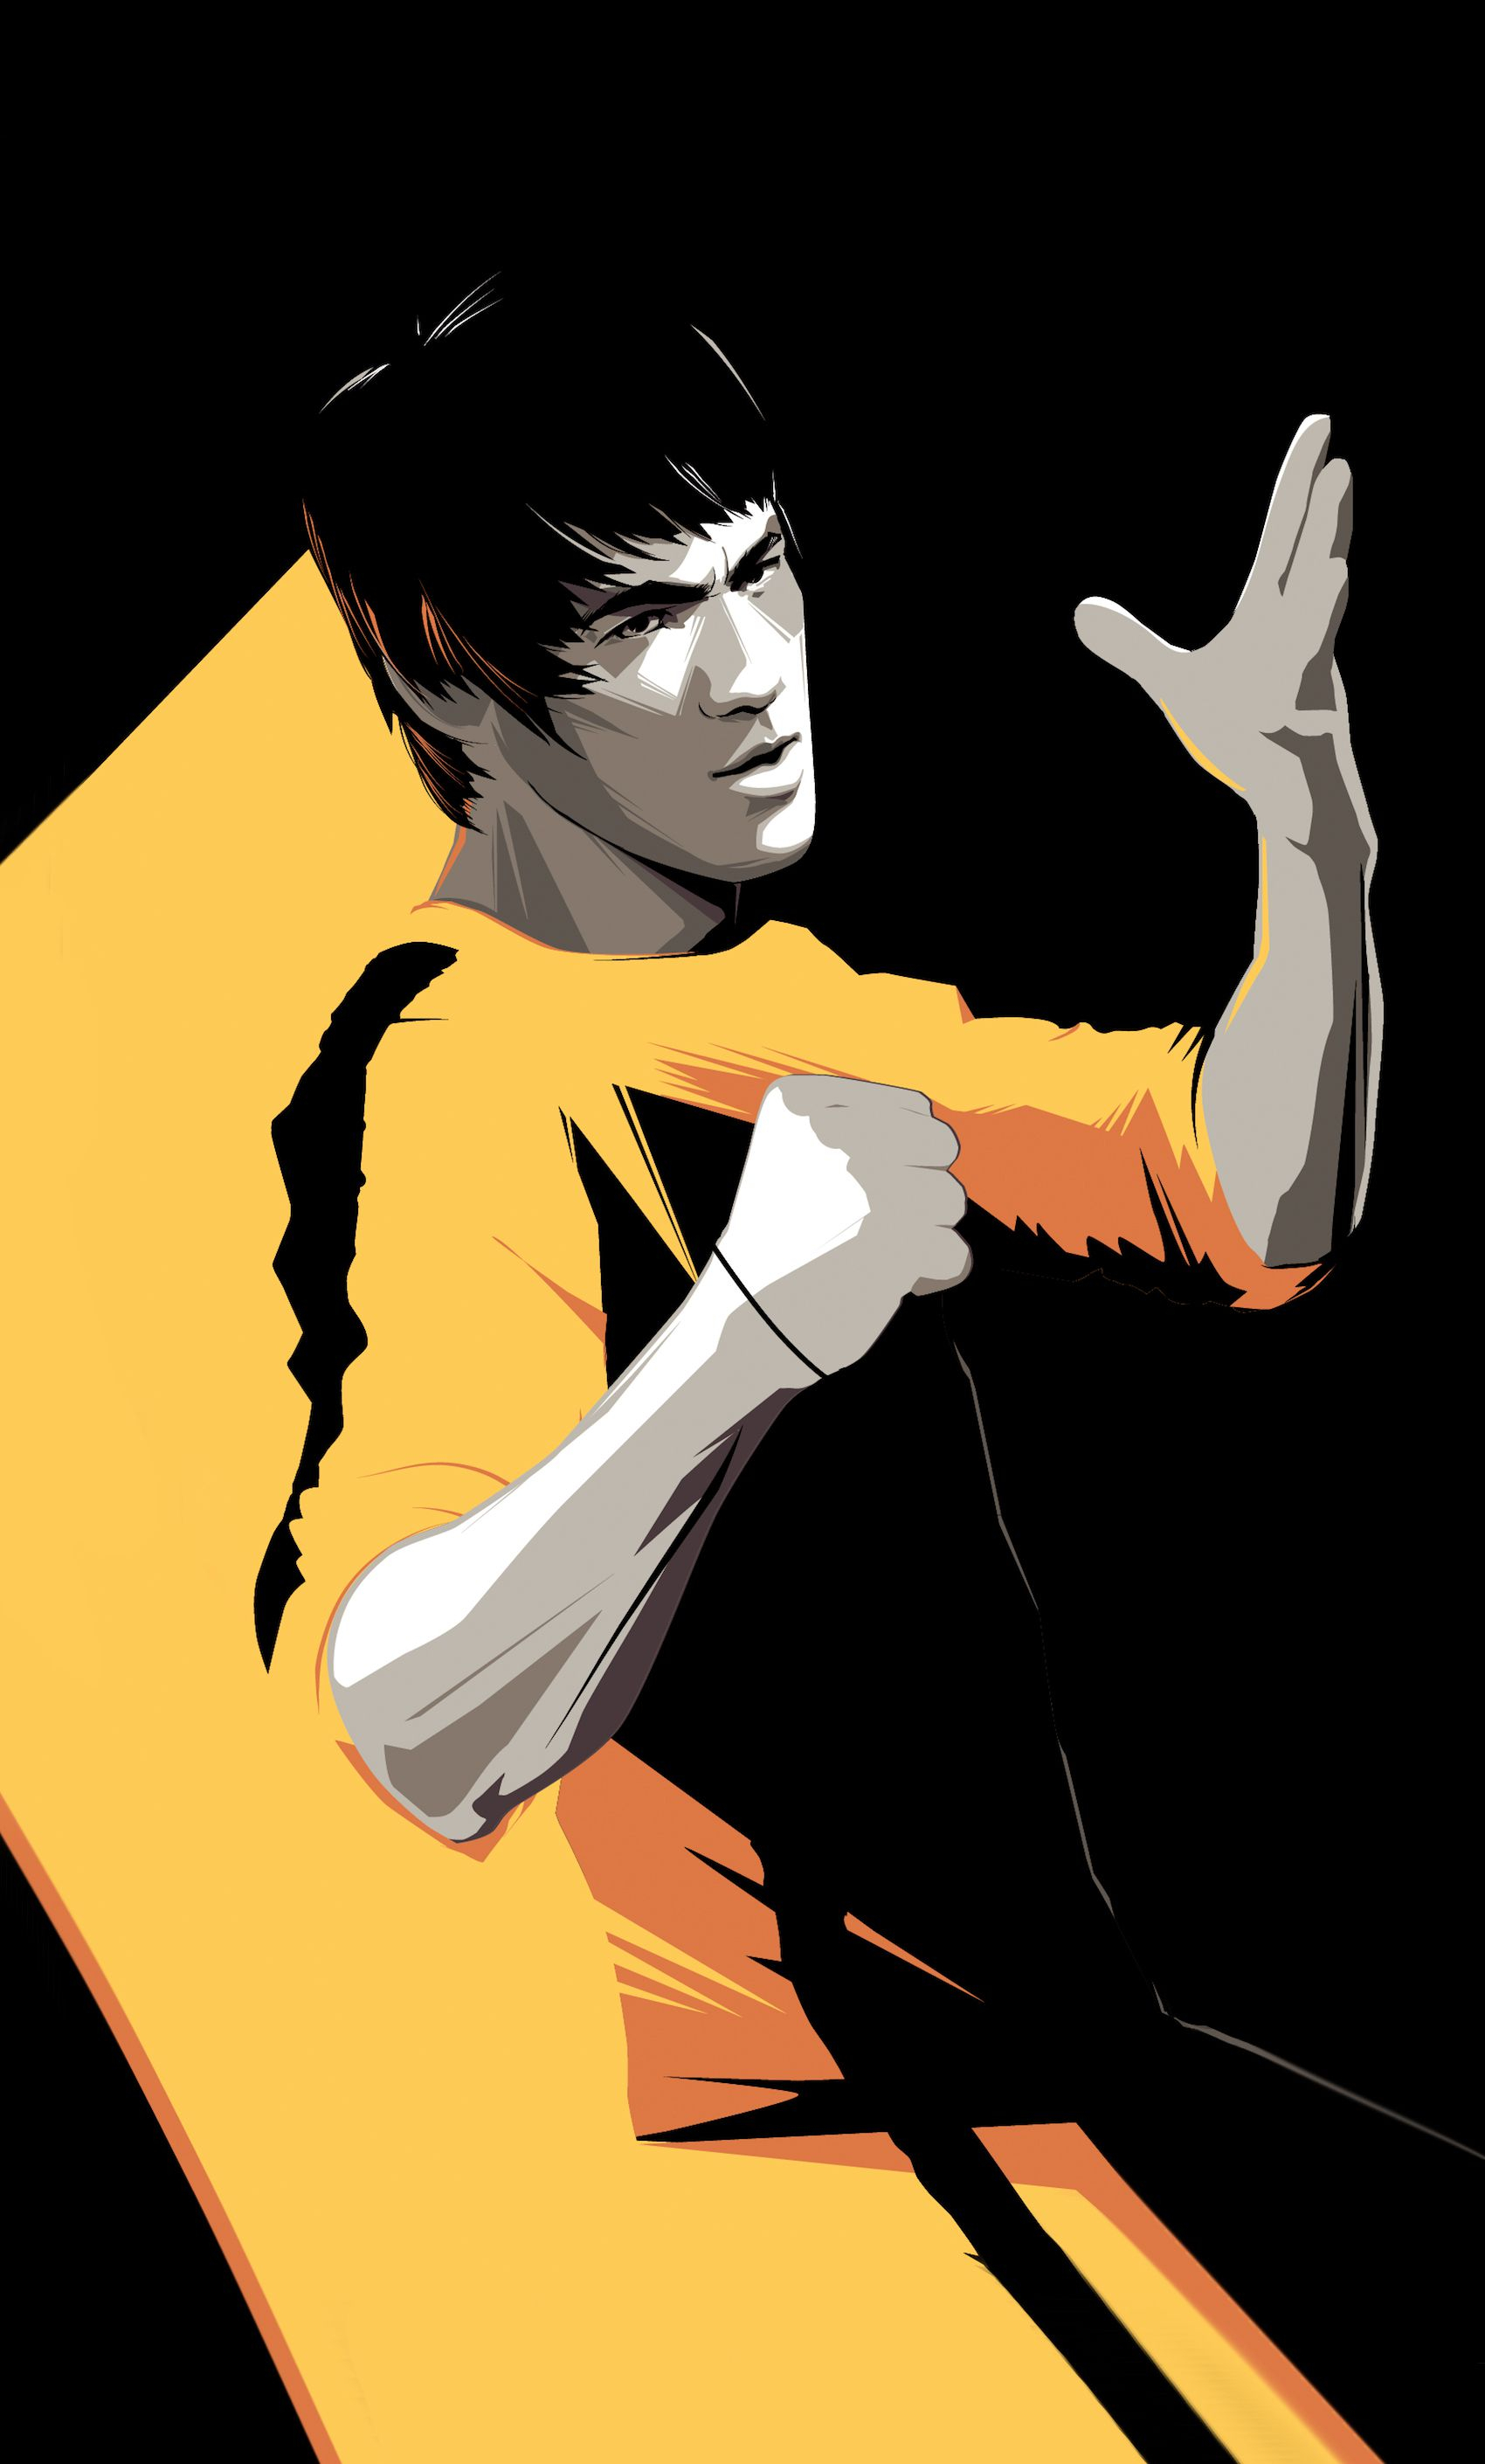 10 New Bruce Lee Wallpaper Iphone FULL HD 1920×1080 For PC ...